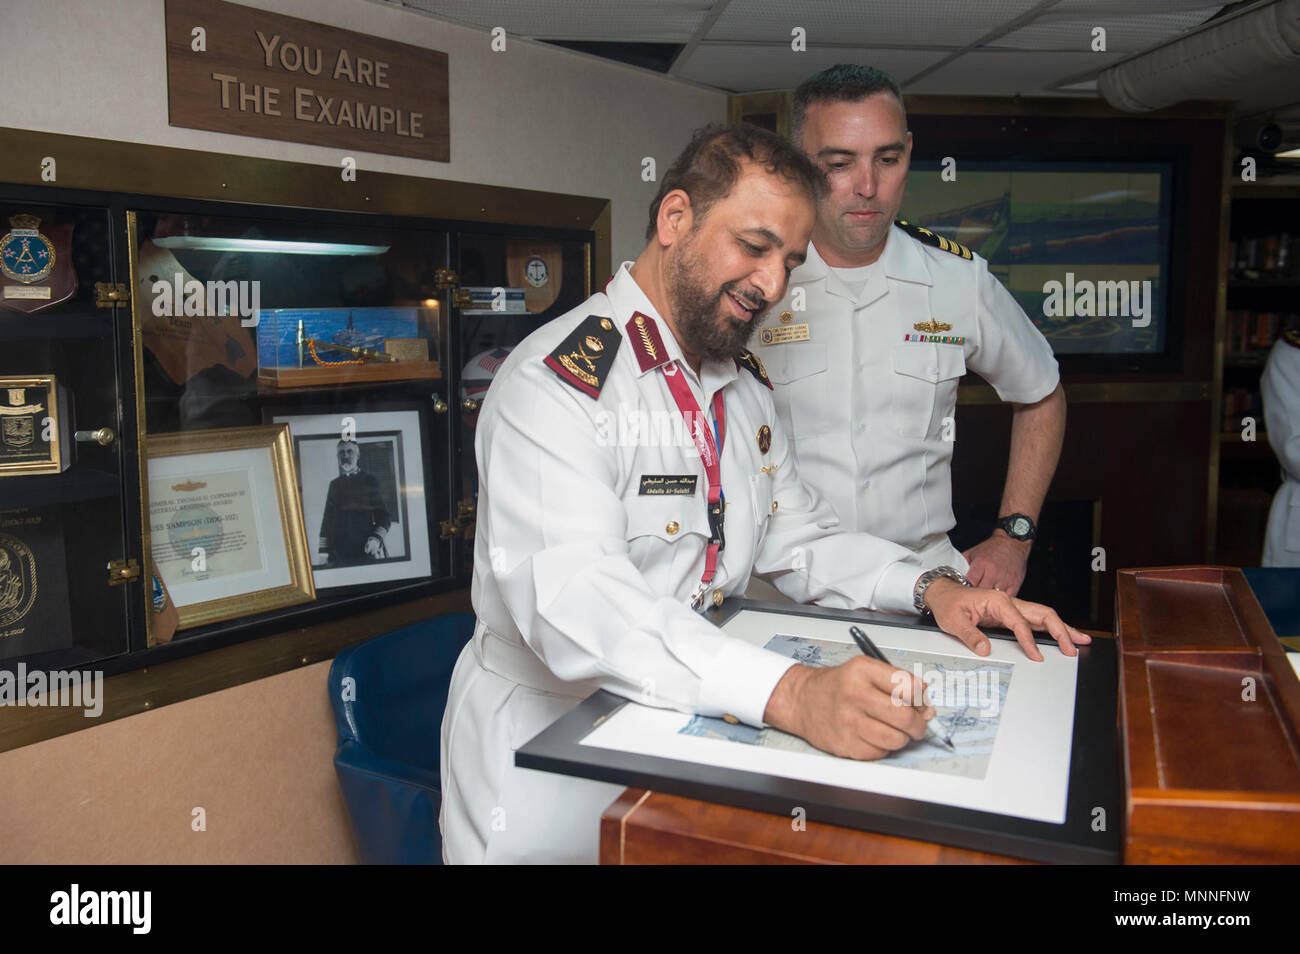 DOHA, Qatar (March 11, 2018) Maj. Gen. Abdulla bin Hassan Al Sulaiti, commander of the Qatar Emiri Naval Forces signs a portrait during his visit aboard the Arleigh Burke-class guided-missile destroyer USS Sampson (DDG 102). Sampson is deployed with the Theodore Roosevelt Carrier Strike Group to the U.S. 5th Fleet area of operations in support of maritime operations to reassure allies and partners and preserve the freedom of navigation and the free flow of commerce in the region. Stock Photo